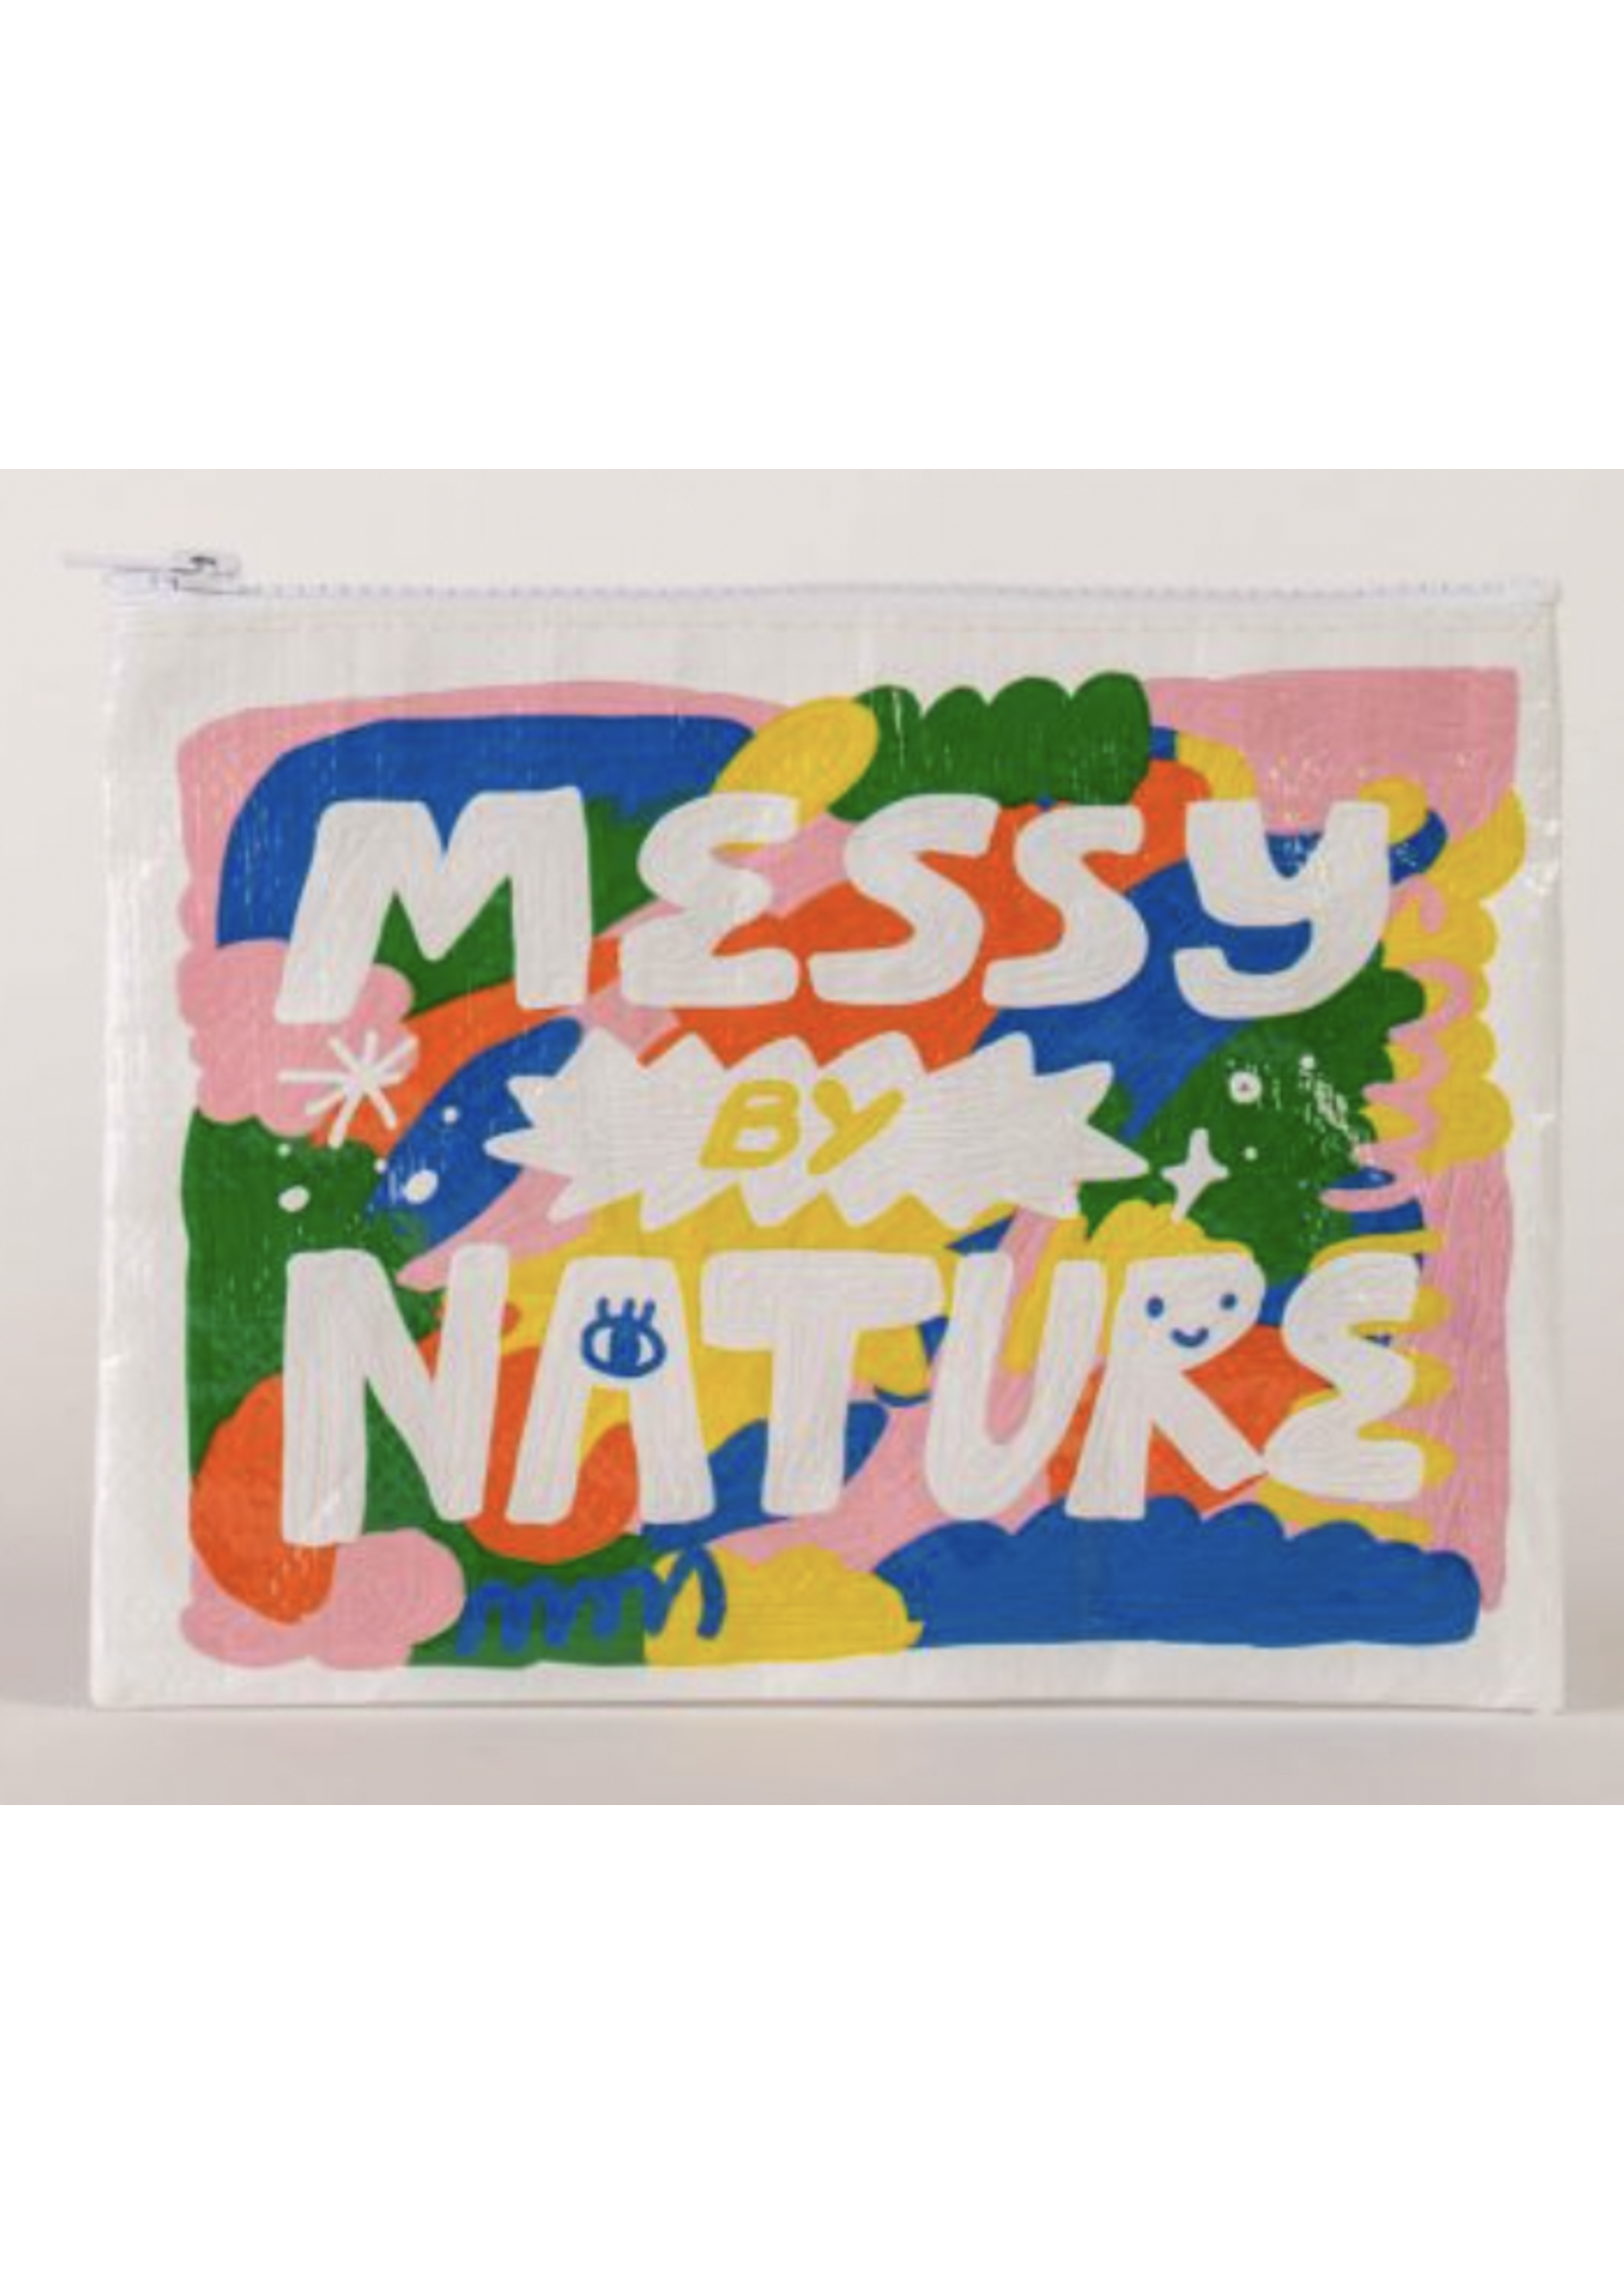 Blue Q Messy by Nature Pouch